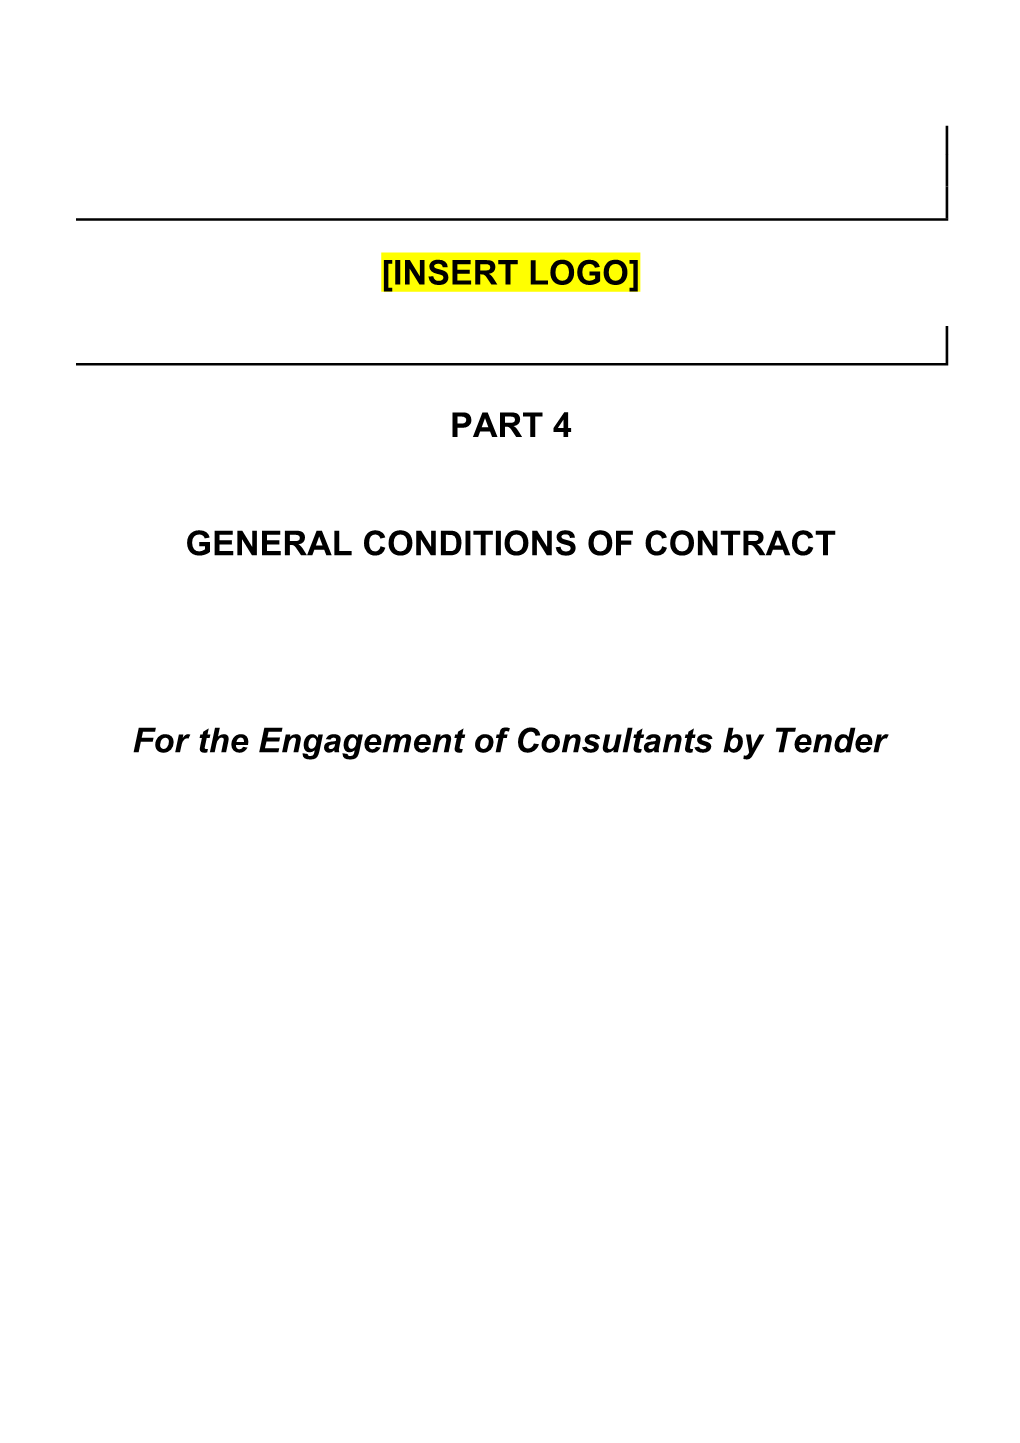 F4 General Conditions of Contract for Engagement of Consultants